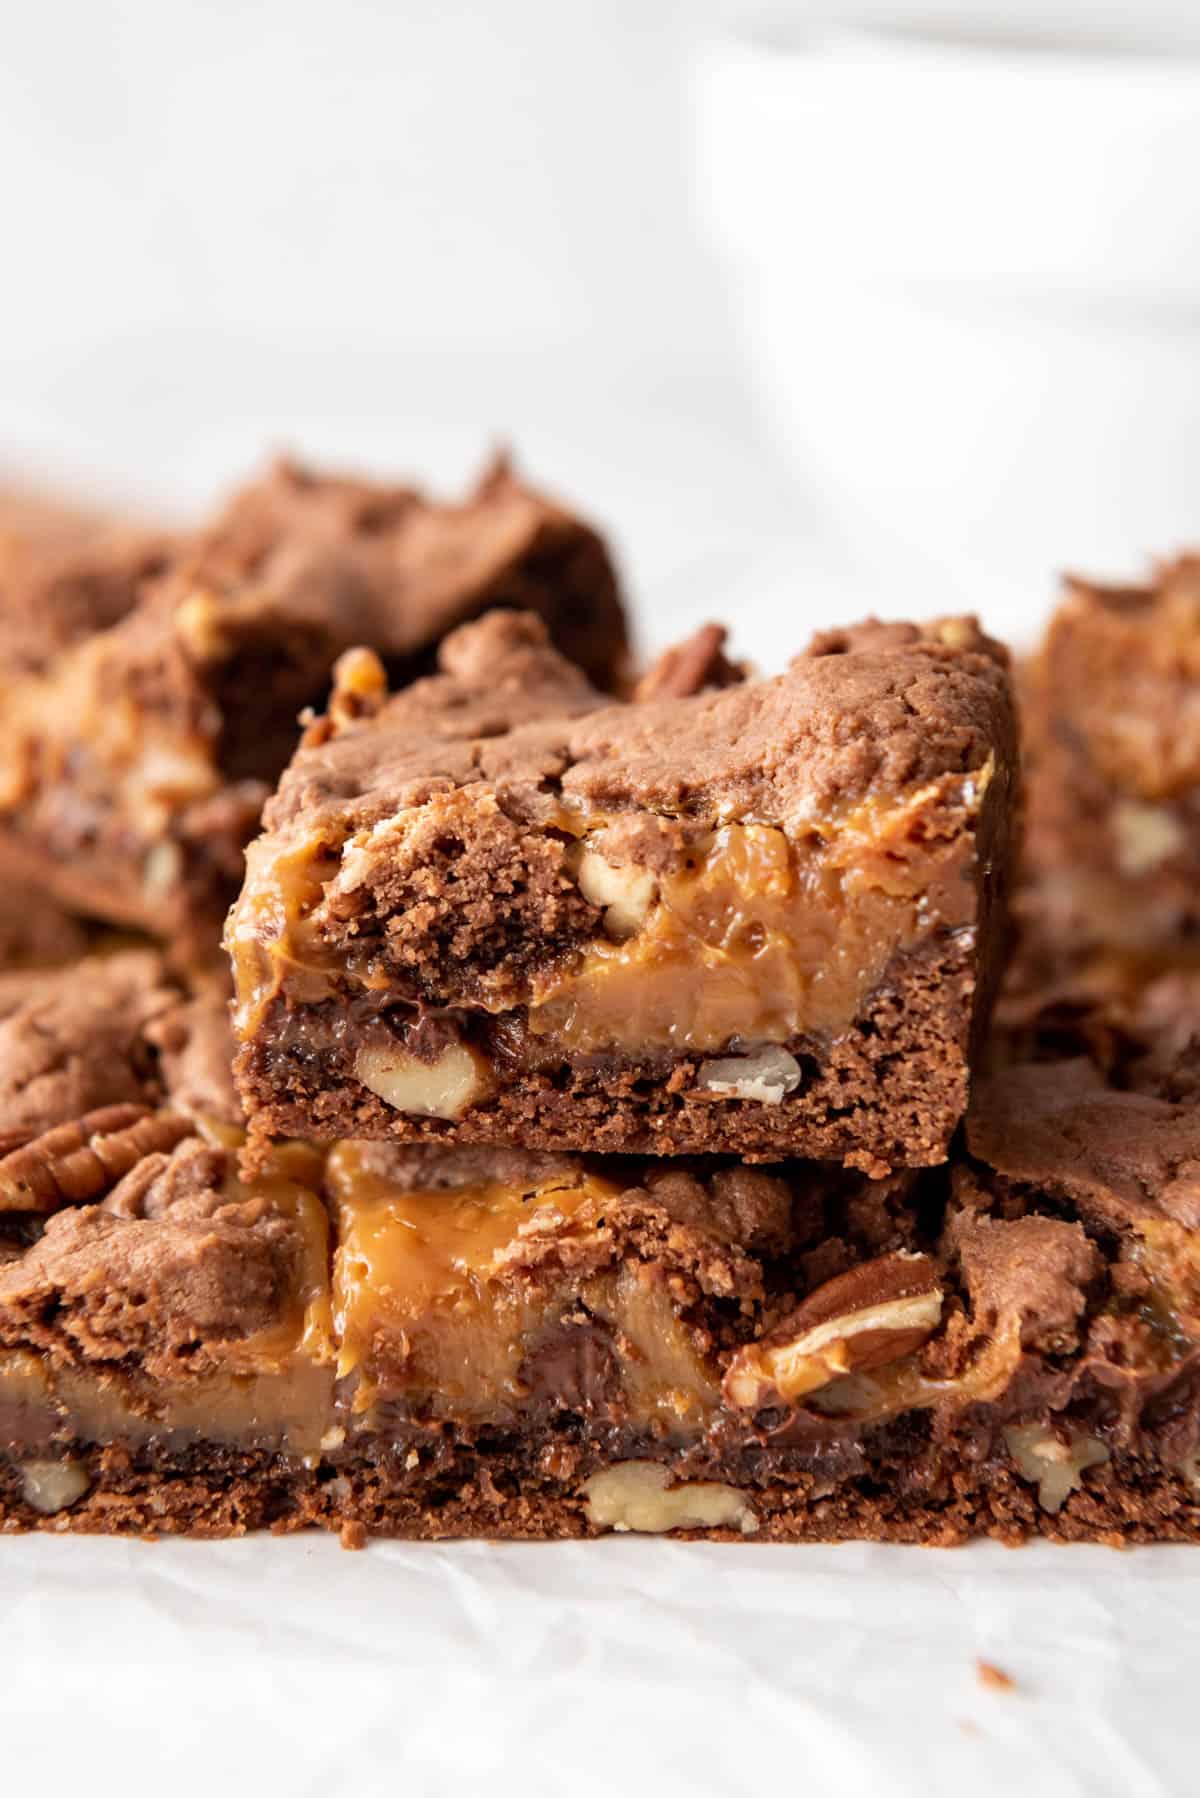 A close image of layers of caramel, brownie, and pecan.